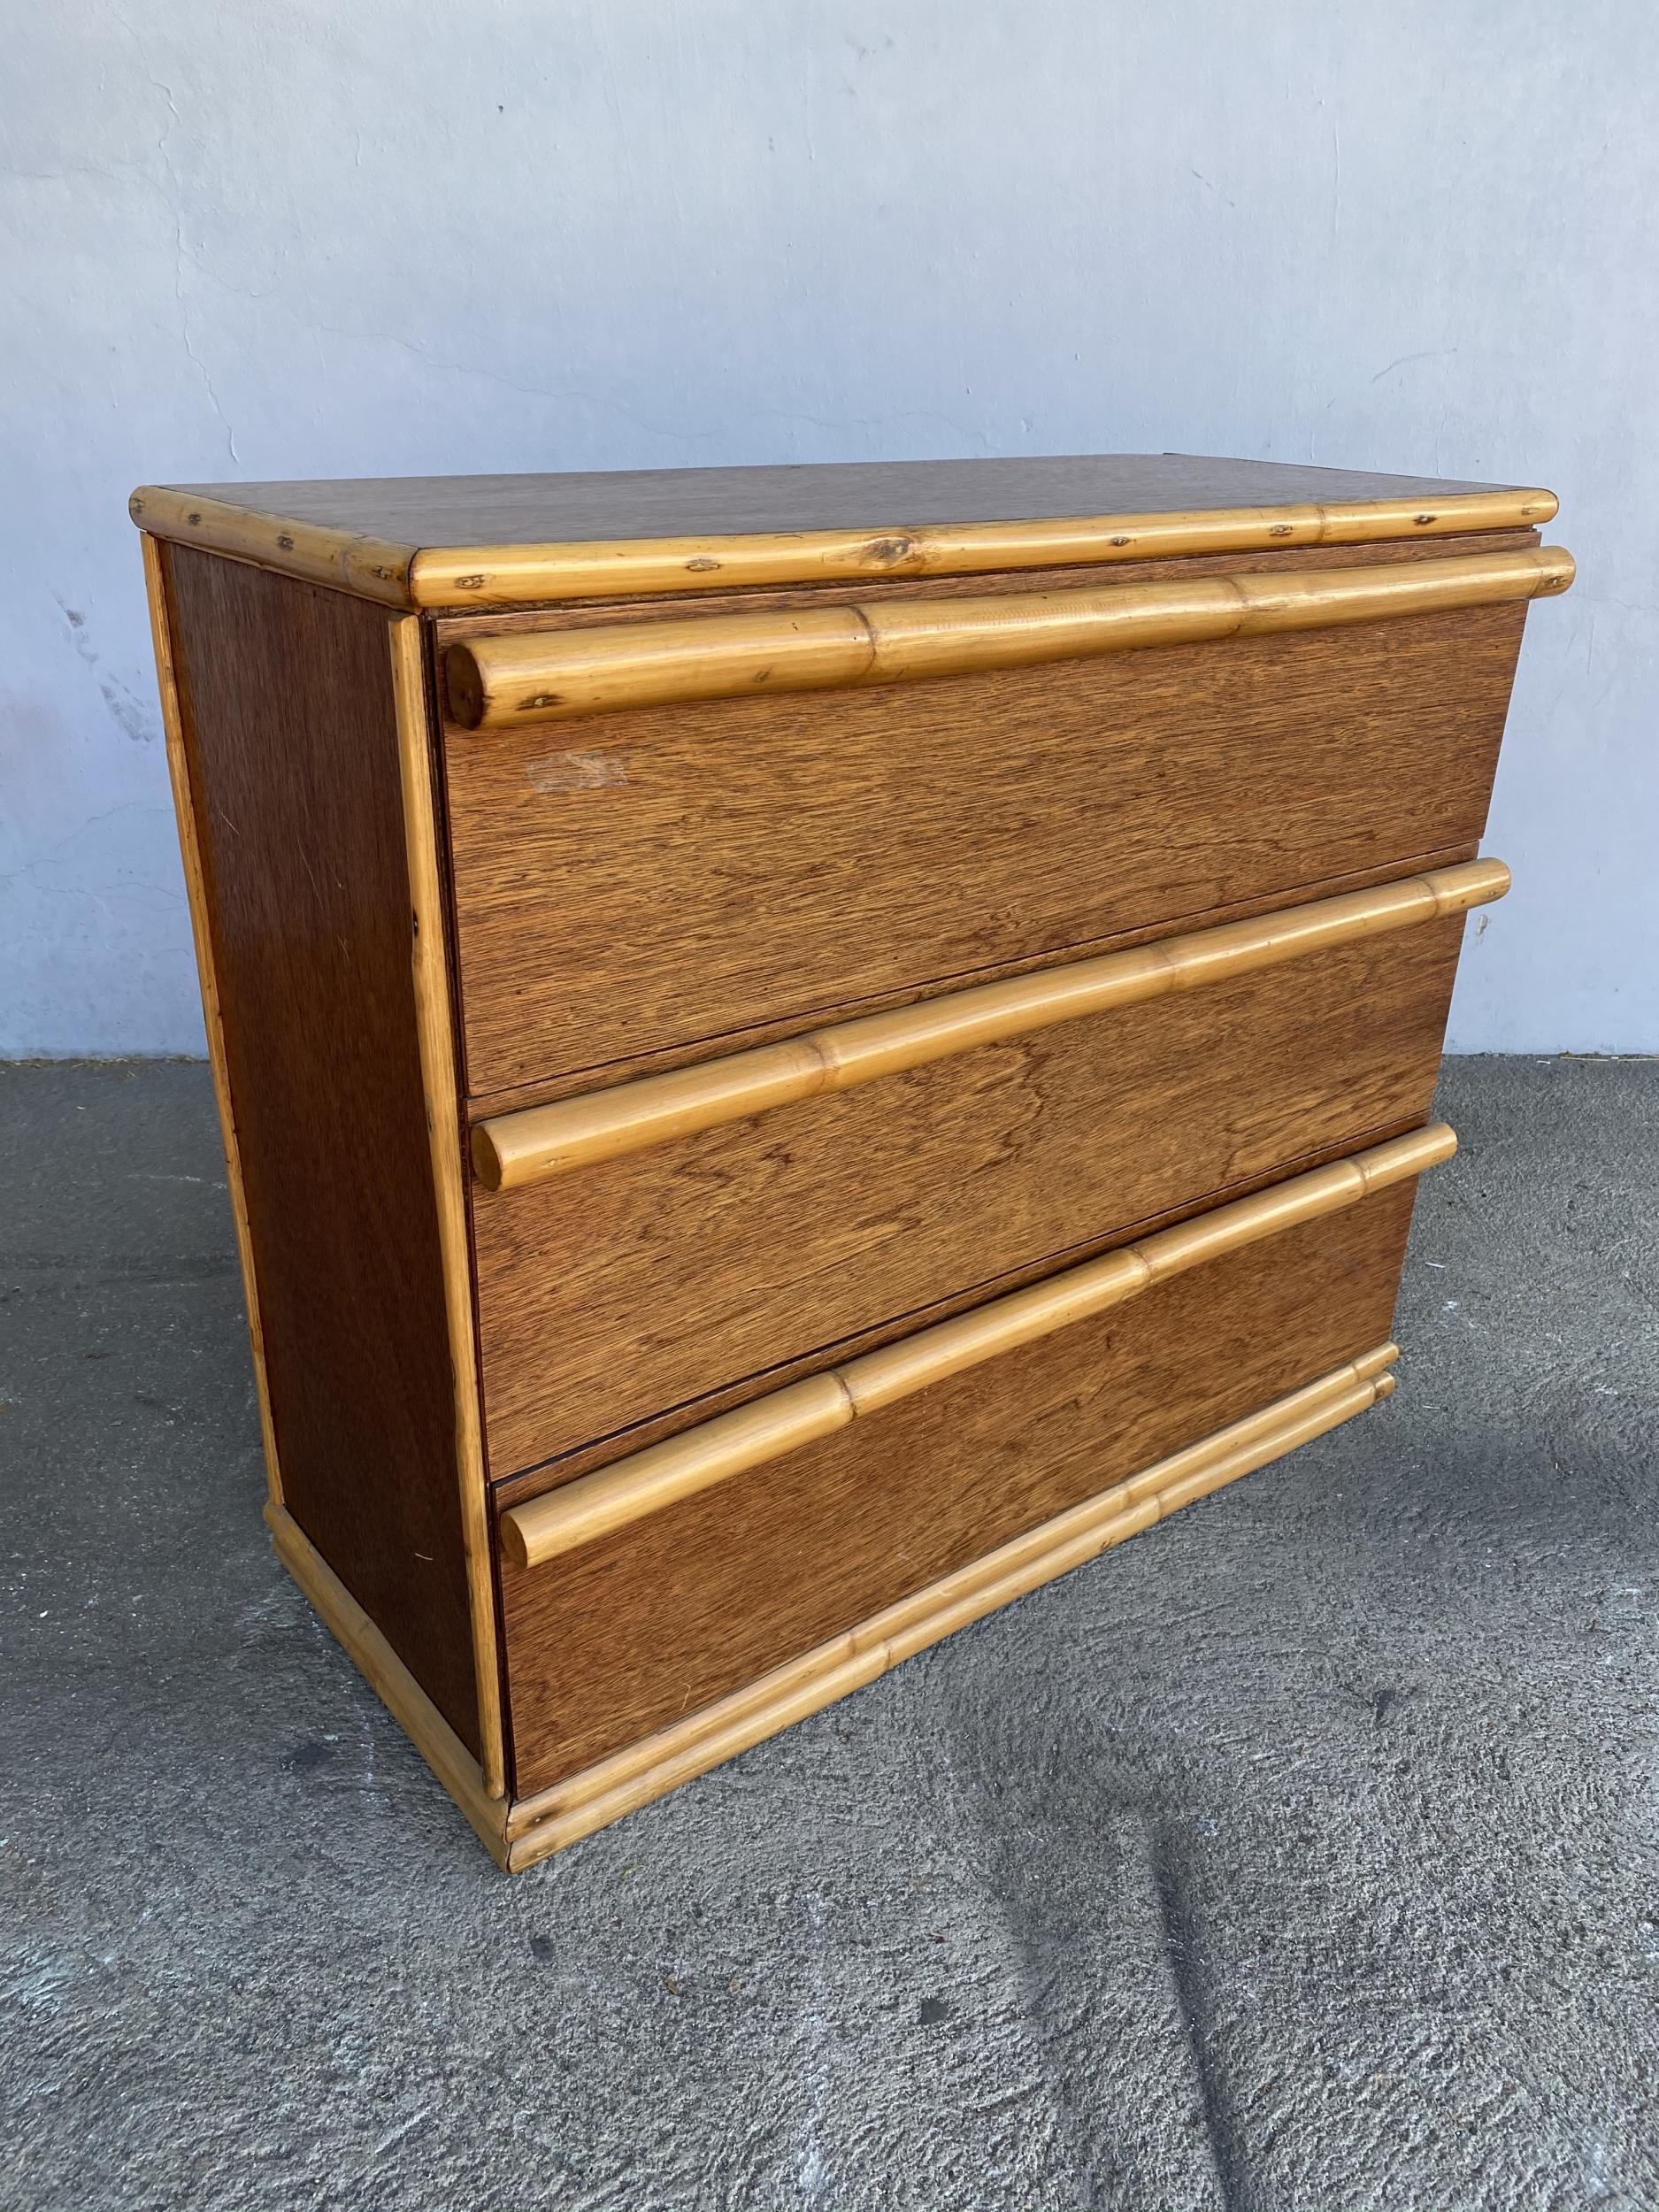 Restored Postwar mahogany lowboy dresser with large full-length rattan pulls along each drawer and stacked rattan base.

Restored to new for you.

All rattan, bamboo, and wicker furniture has been painstakingly refurbished to the highest